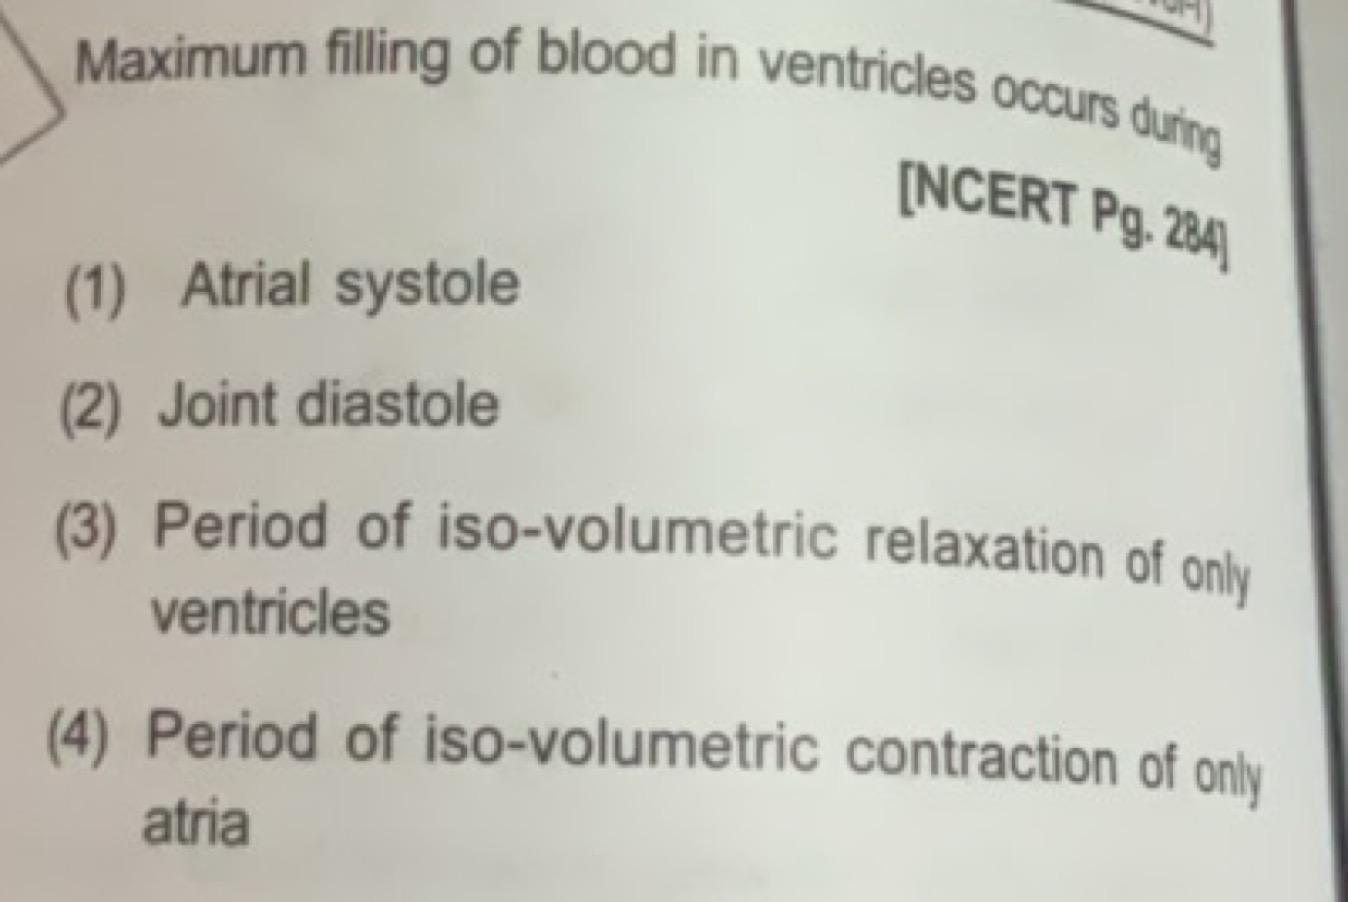 Maximum filling of blood in ventricles occurs during [NCERT Pg. 284]